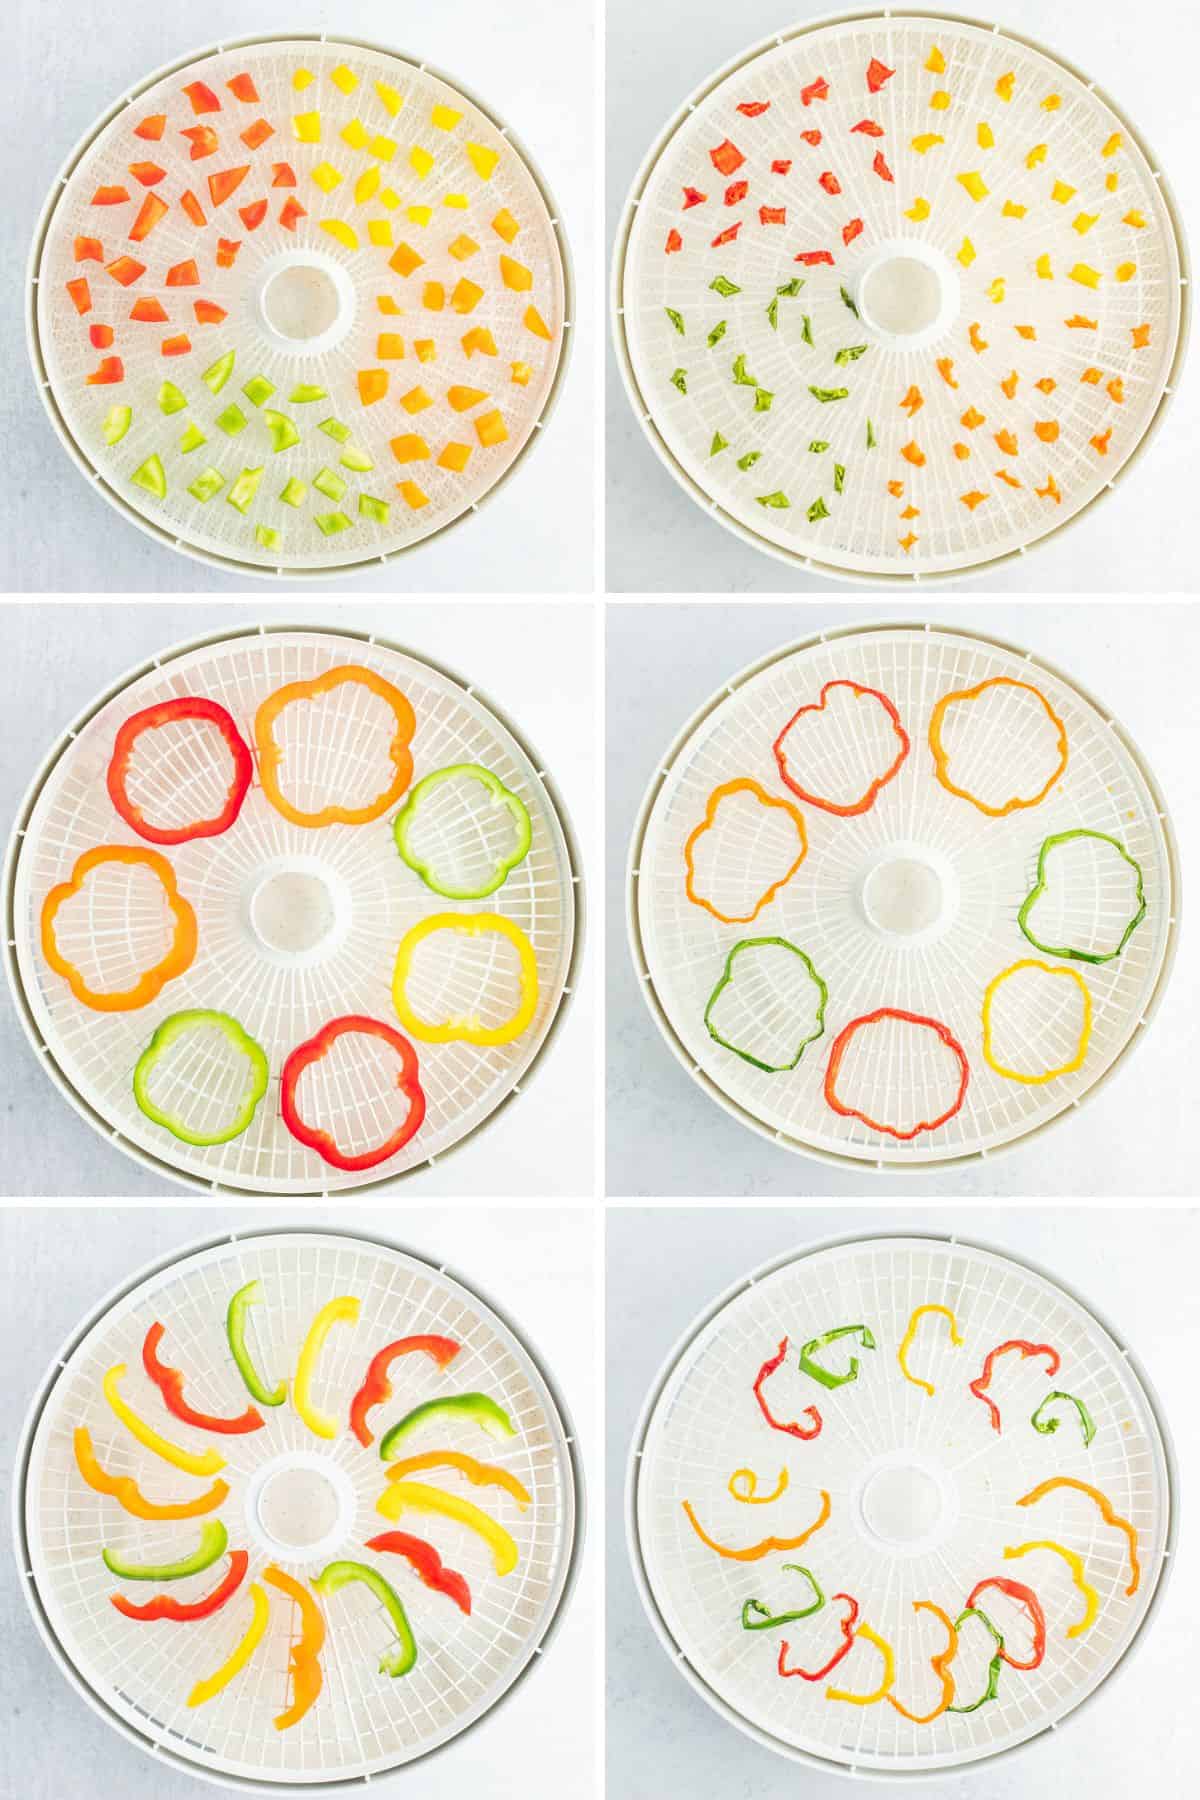 6 photos showing the process of dehydrating peppers.